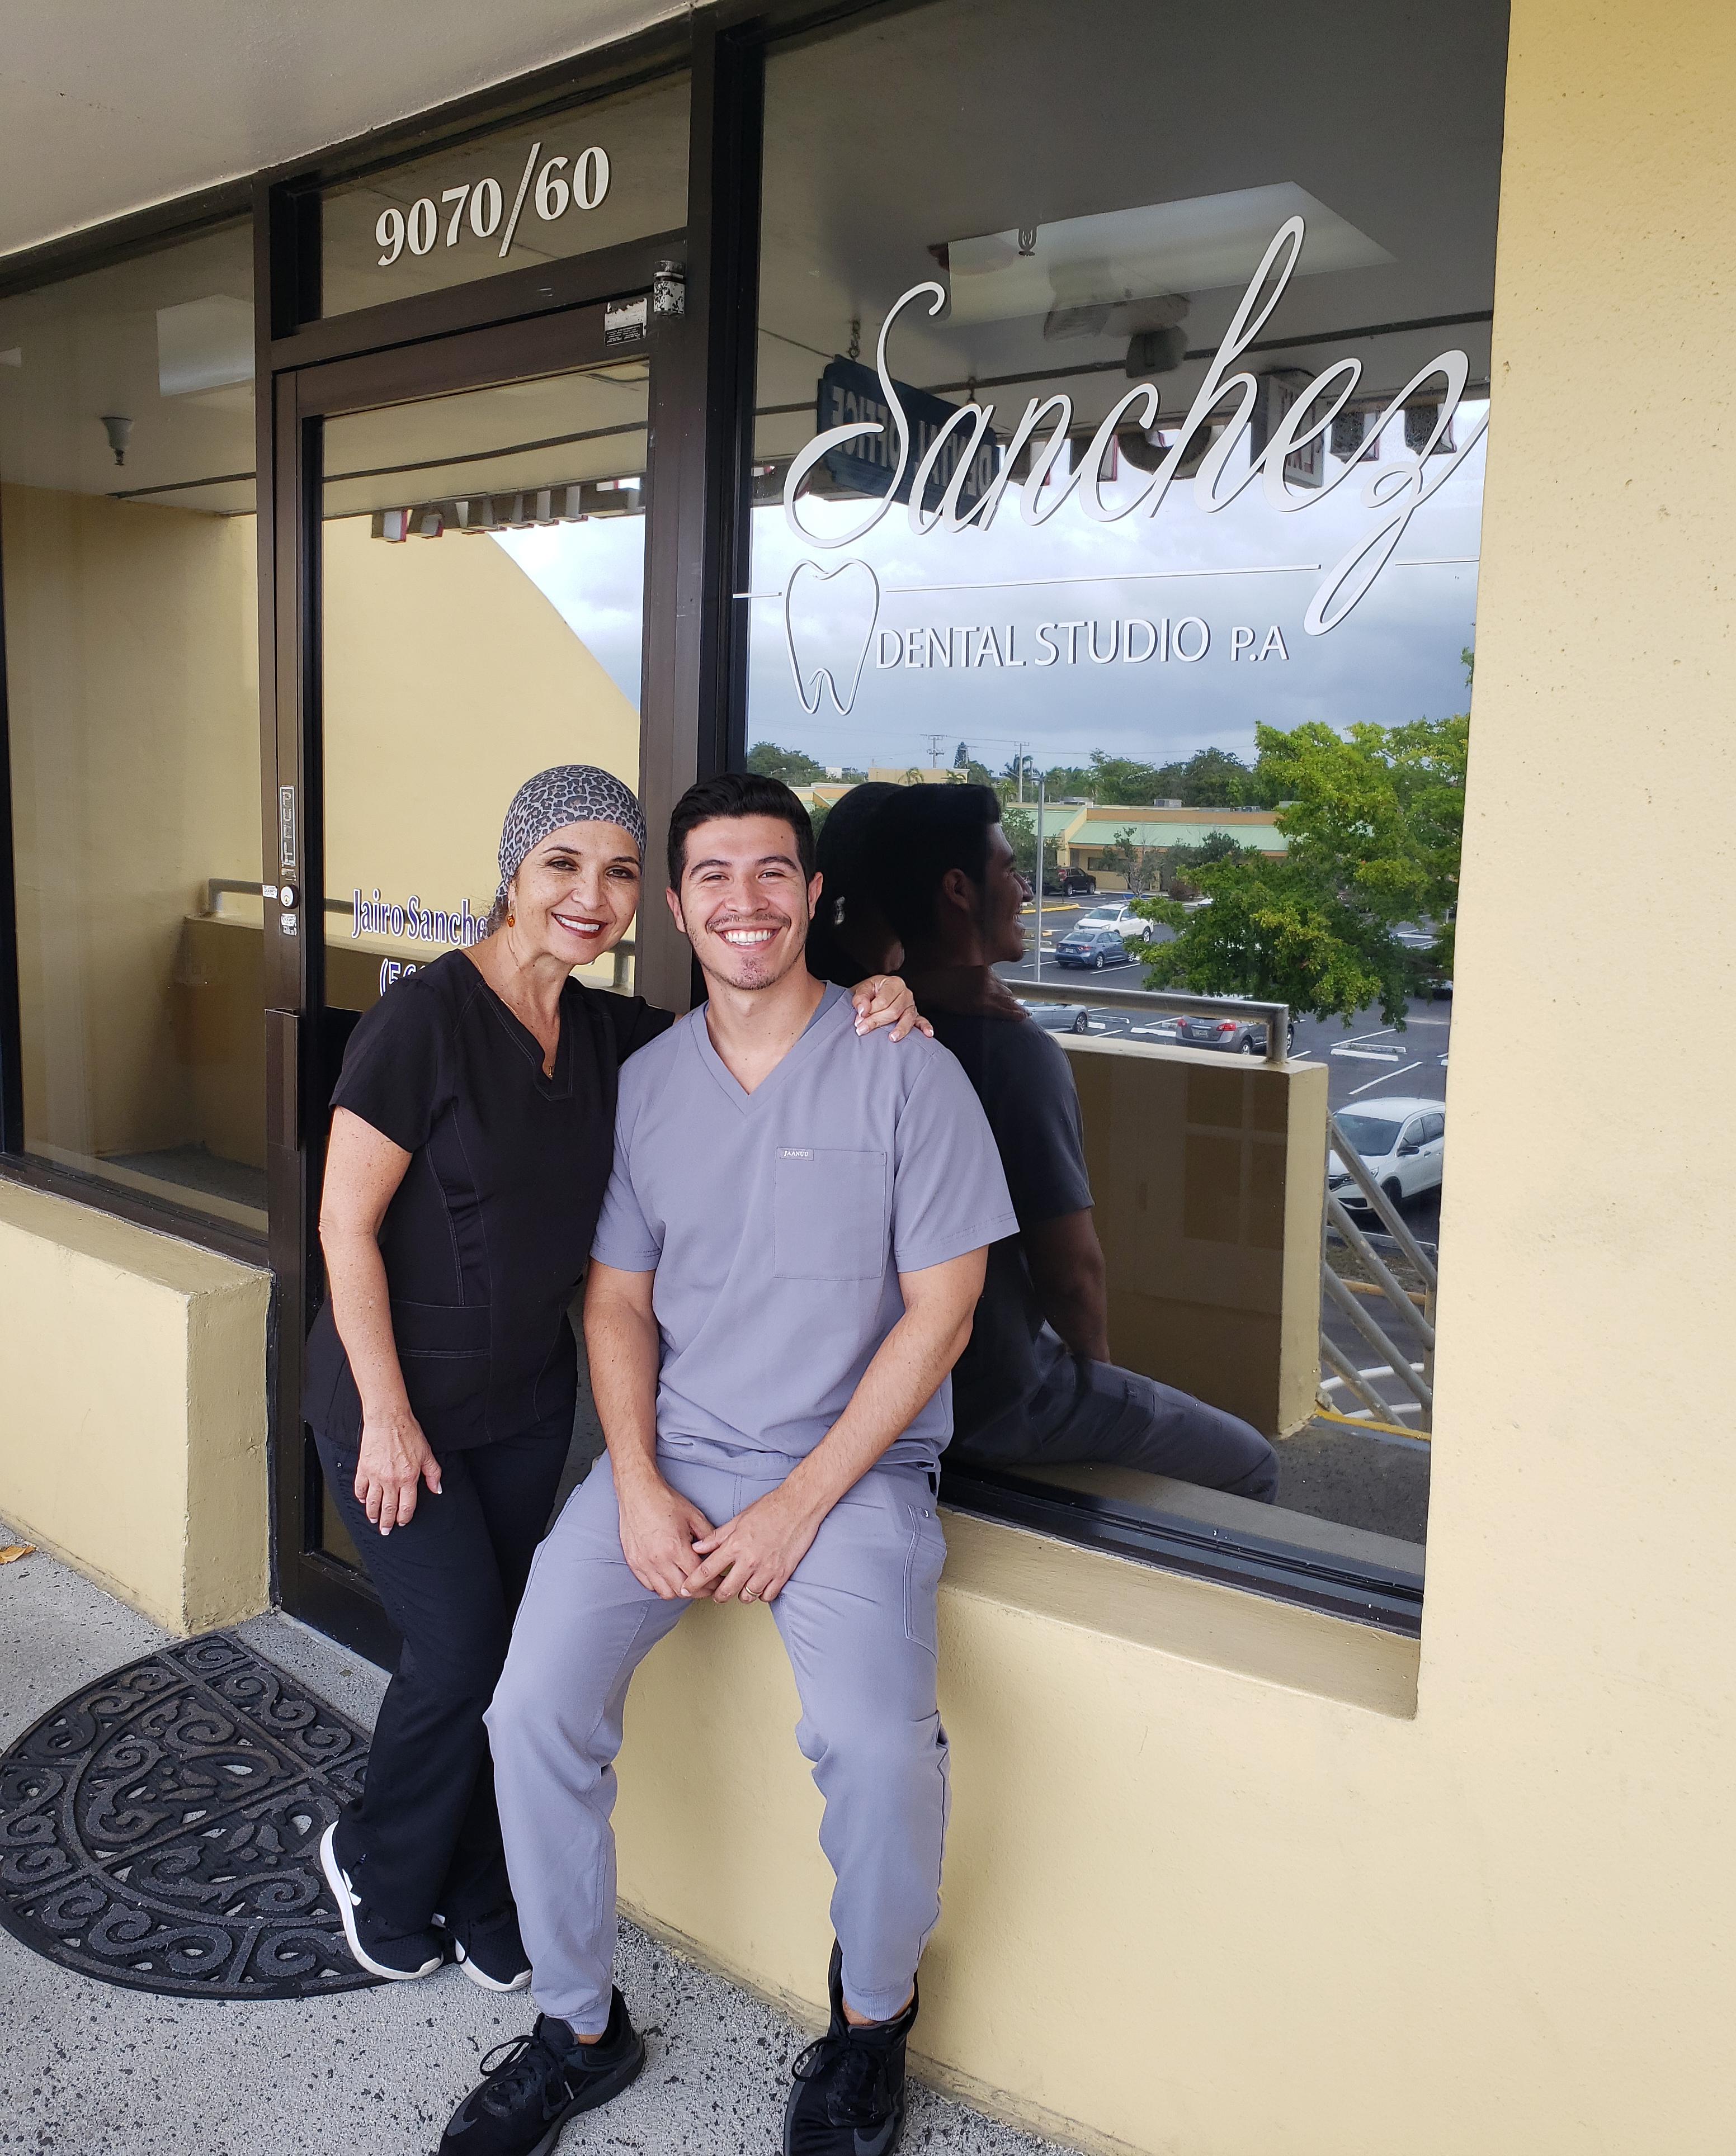 Boca Raton Traveling Dentist offering in home dentistry for patients who don't want to leave their house or assisted living center. Services include: Dentures, denture repairs, tooth extractions, non-invasive cavity treatments, tooth x-rays, checkups, oral exams, second opinions, and more - contact us to speak to the Boca Raton Dentists!